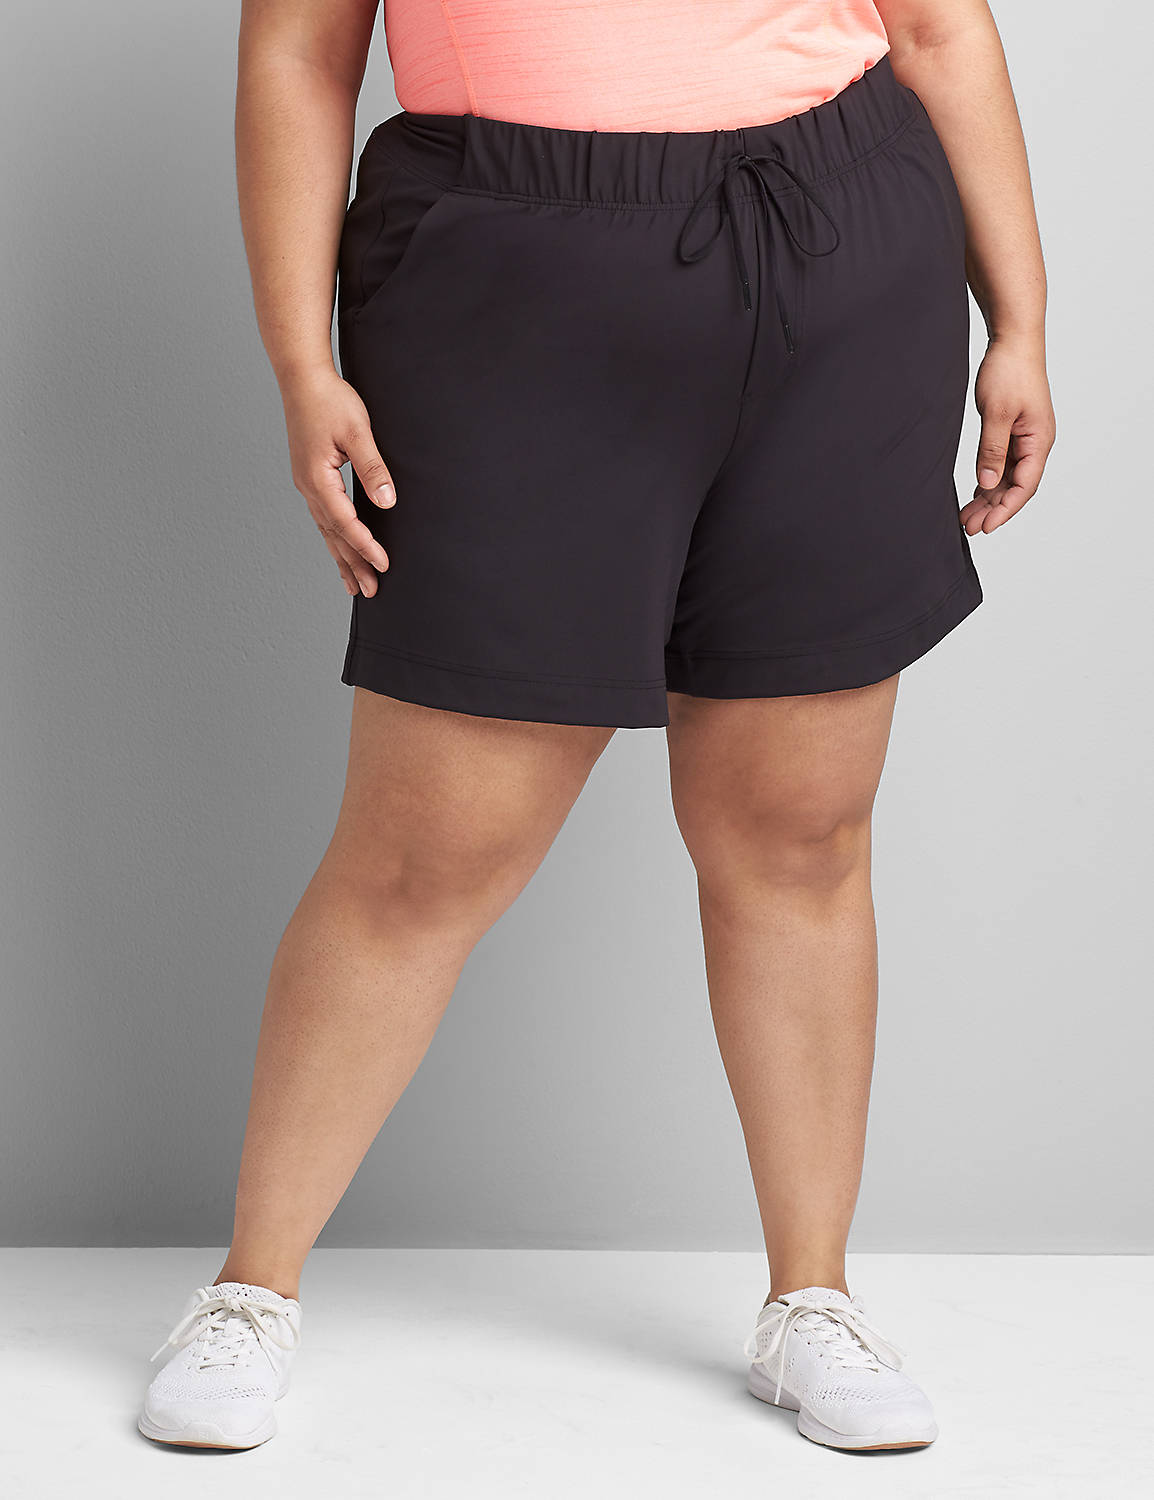 Pull On Stretch Short S 1120817:Ascena Black:18/20 Product Image 1